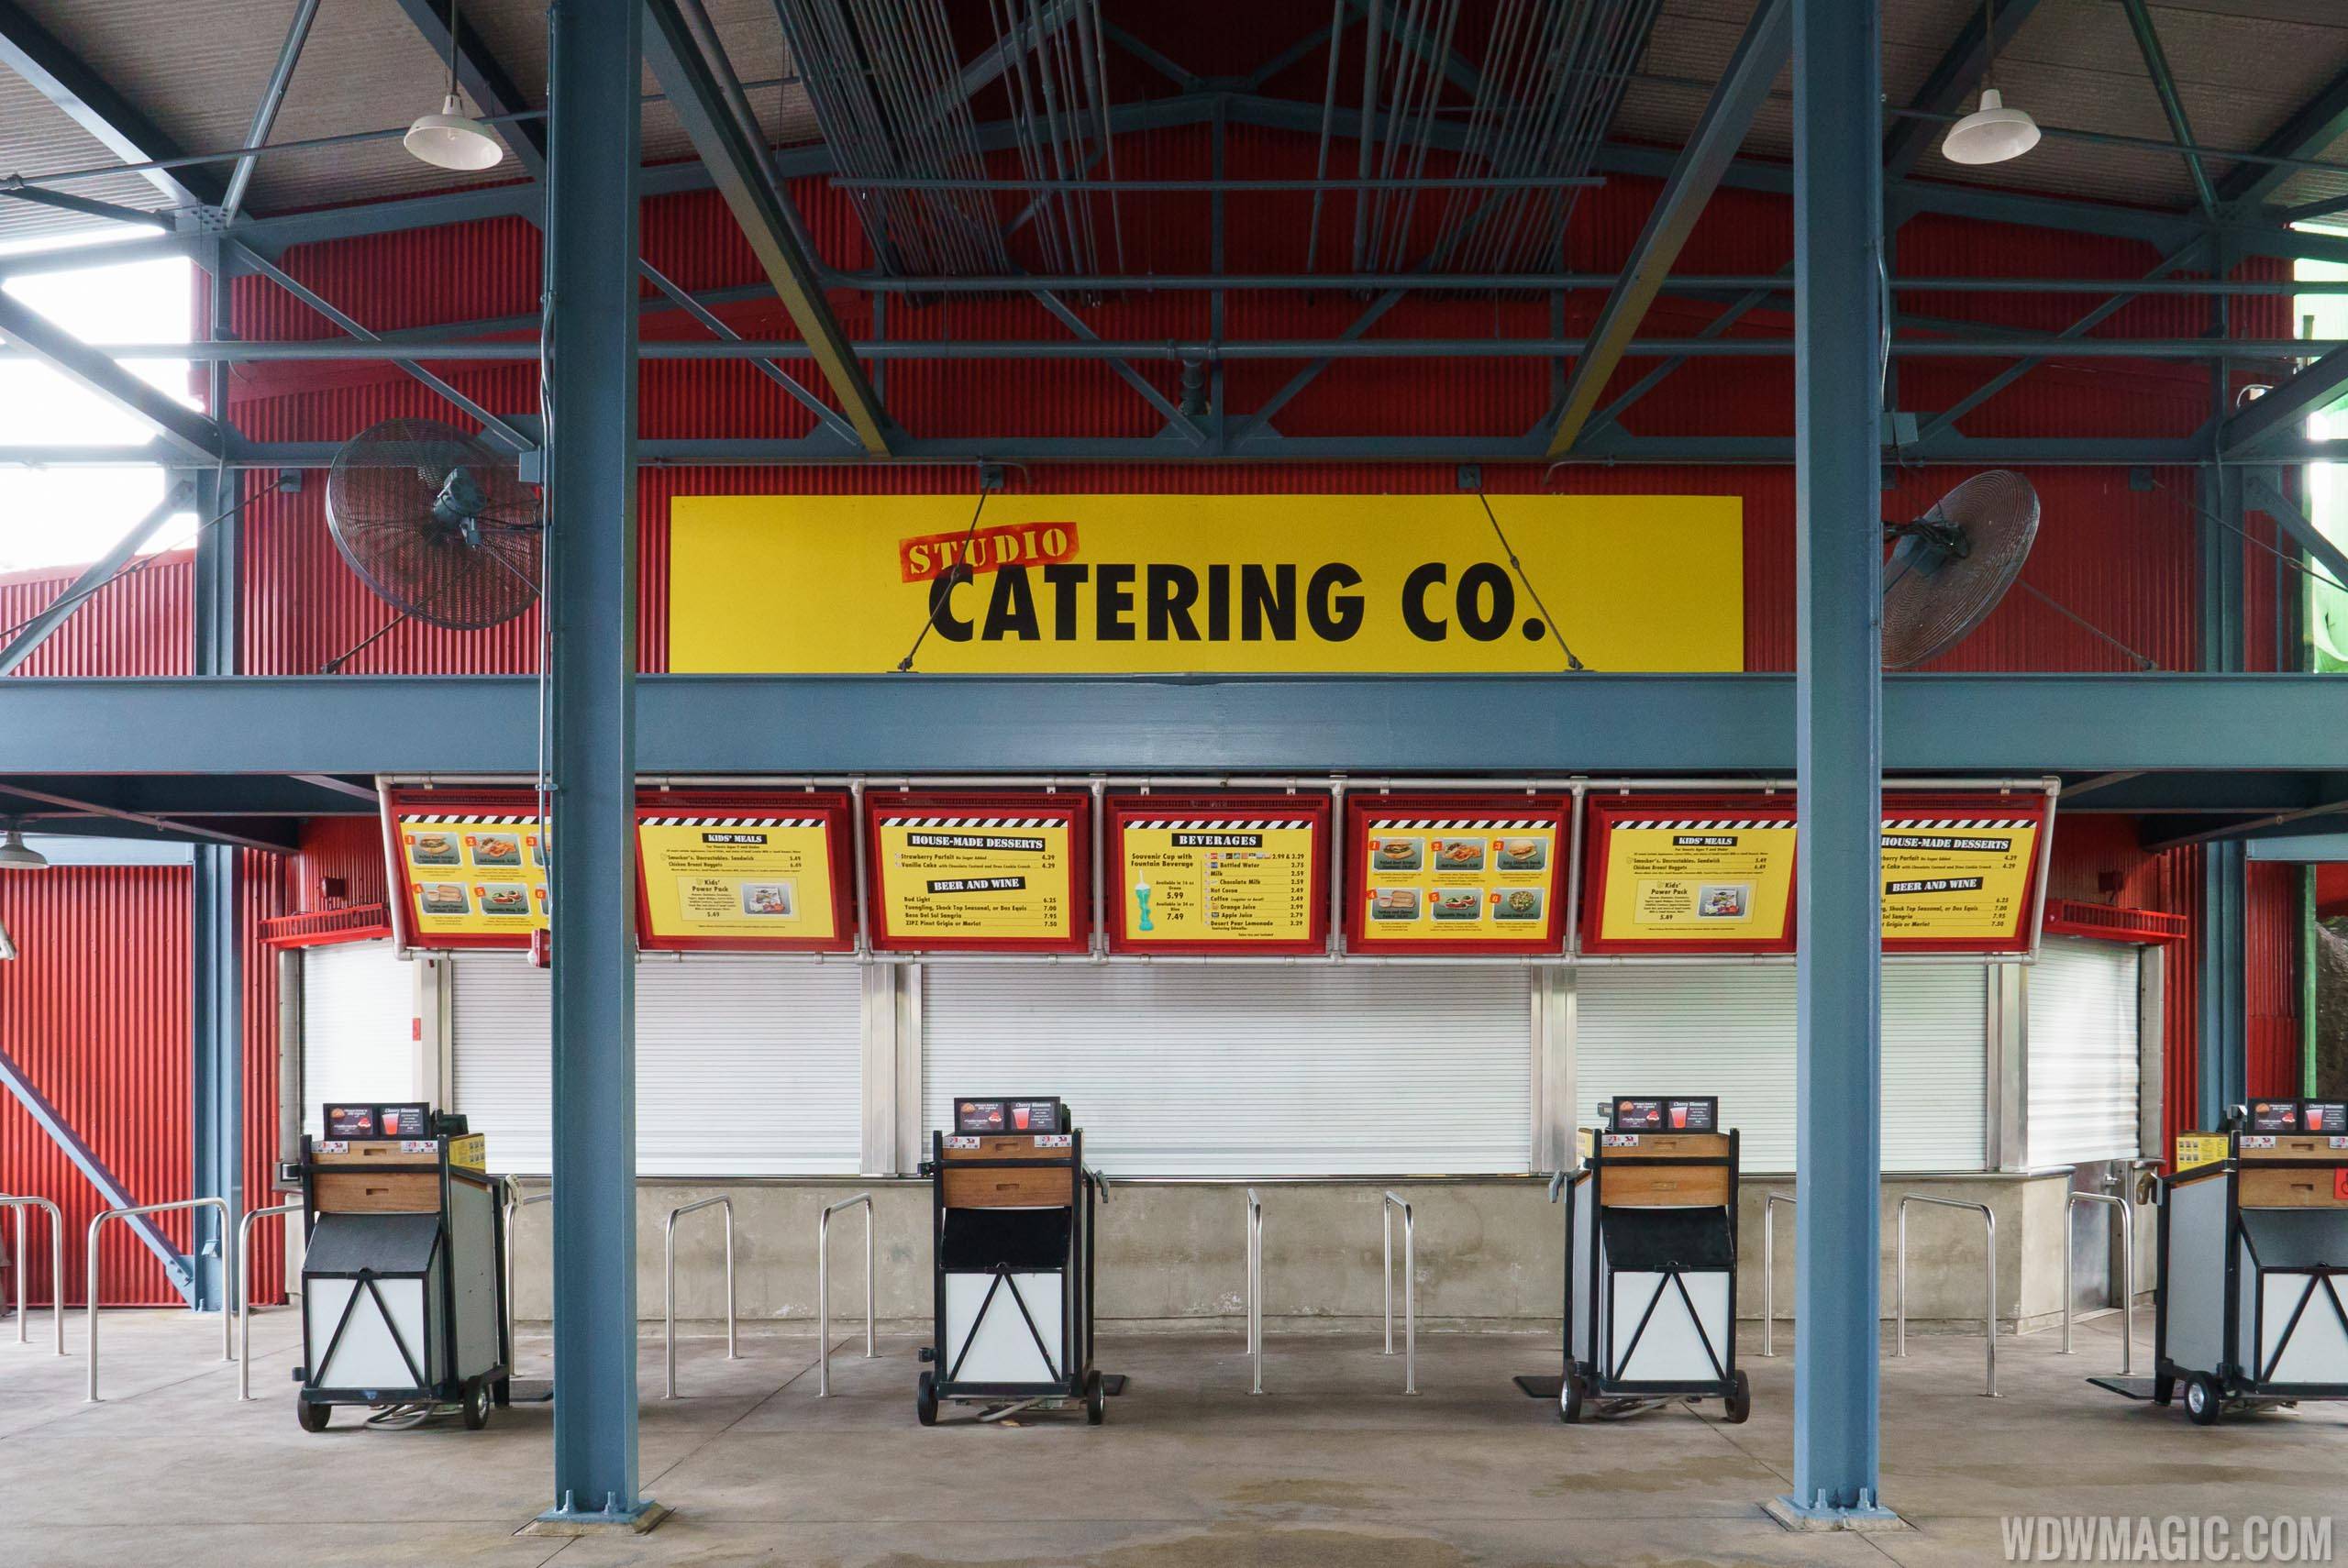 Studio Catering Co. reopens early with new menu and french fries